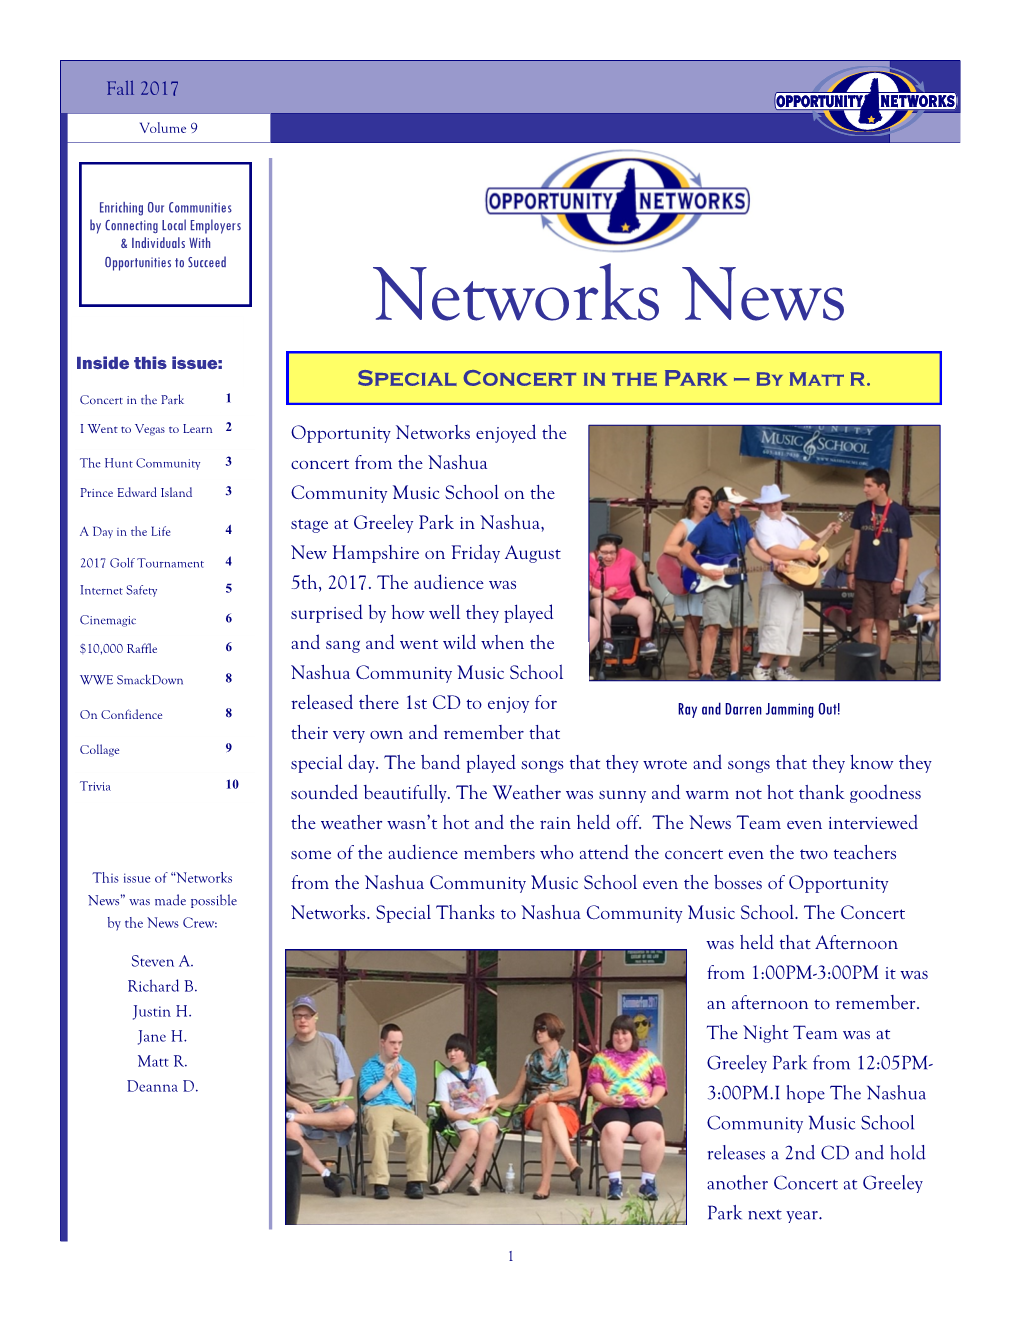 Networks News Inside This Issue: Special Concert in the Park — by Matt R